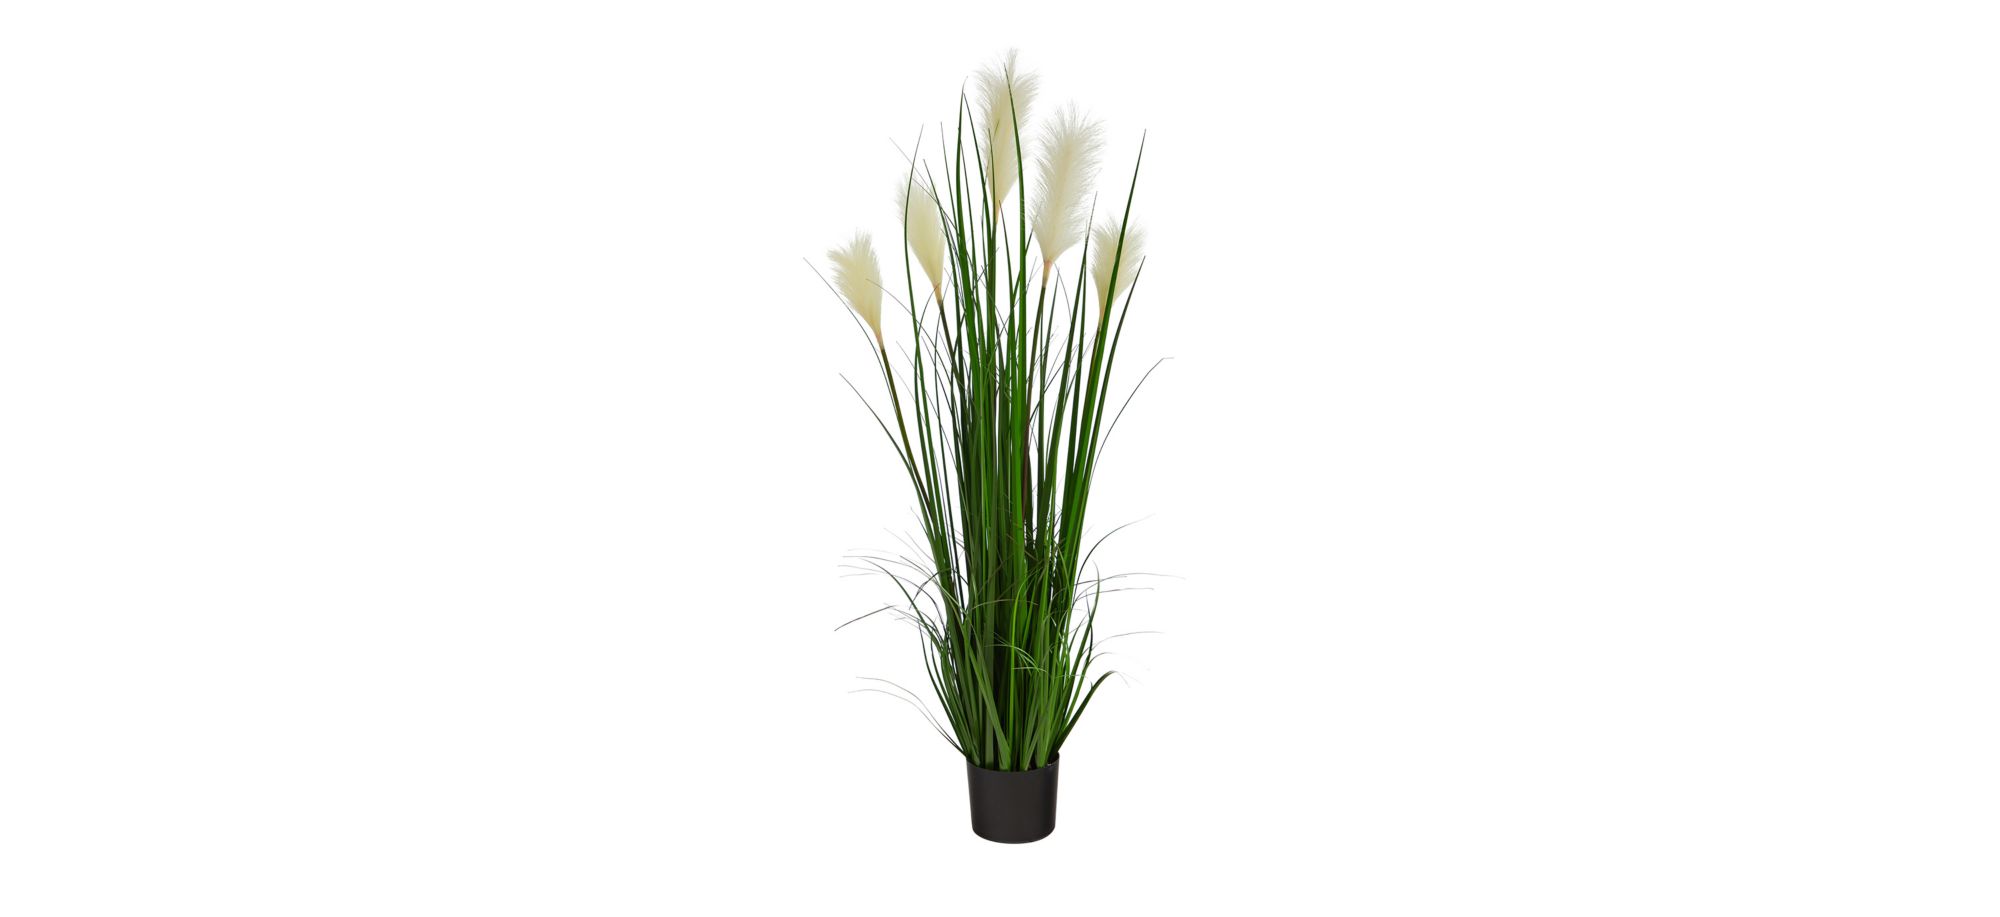 4ft. Plume Grass Artificial Plant in Green by Bellanest